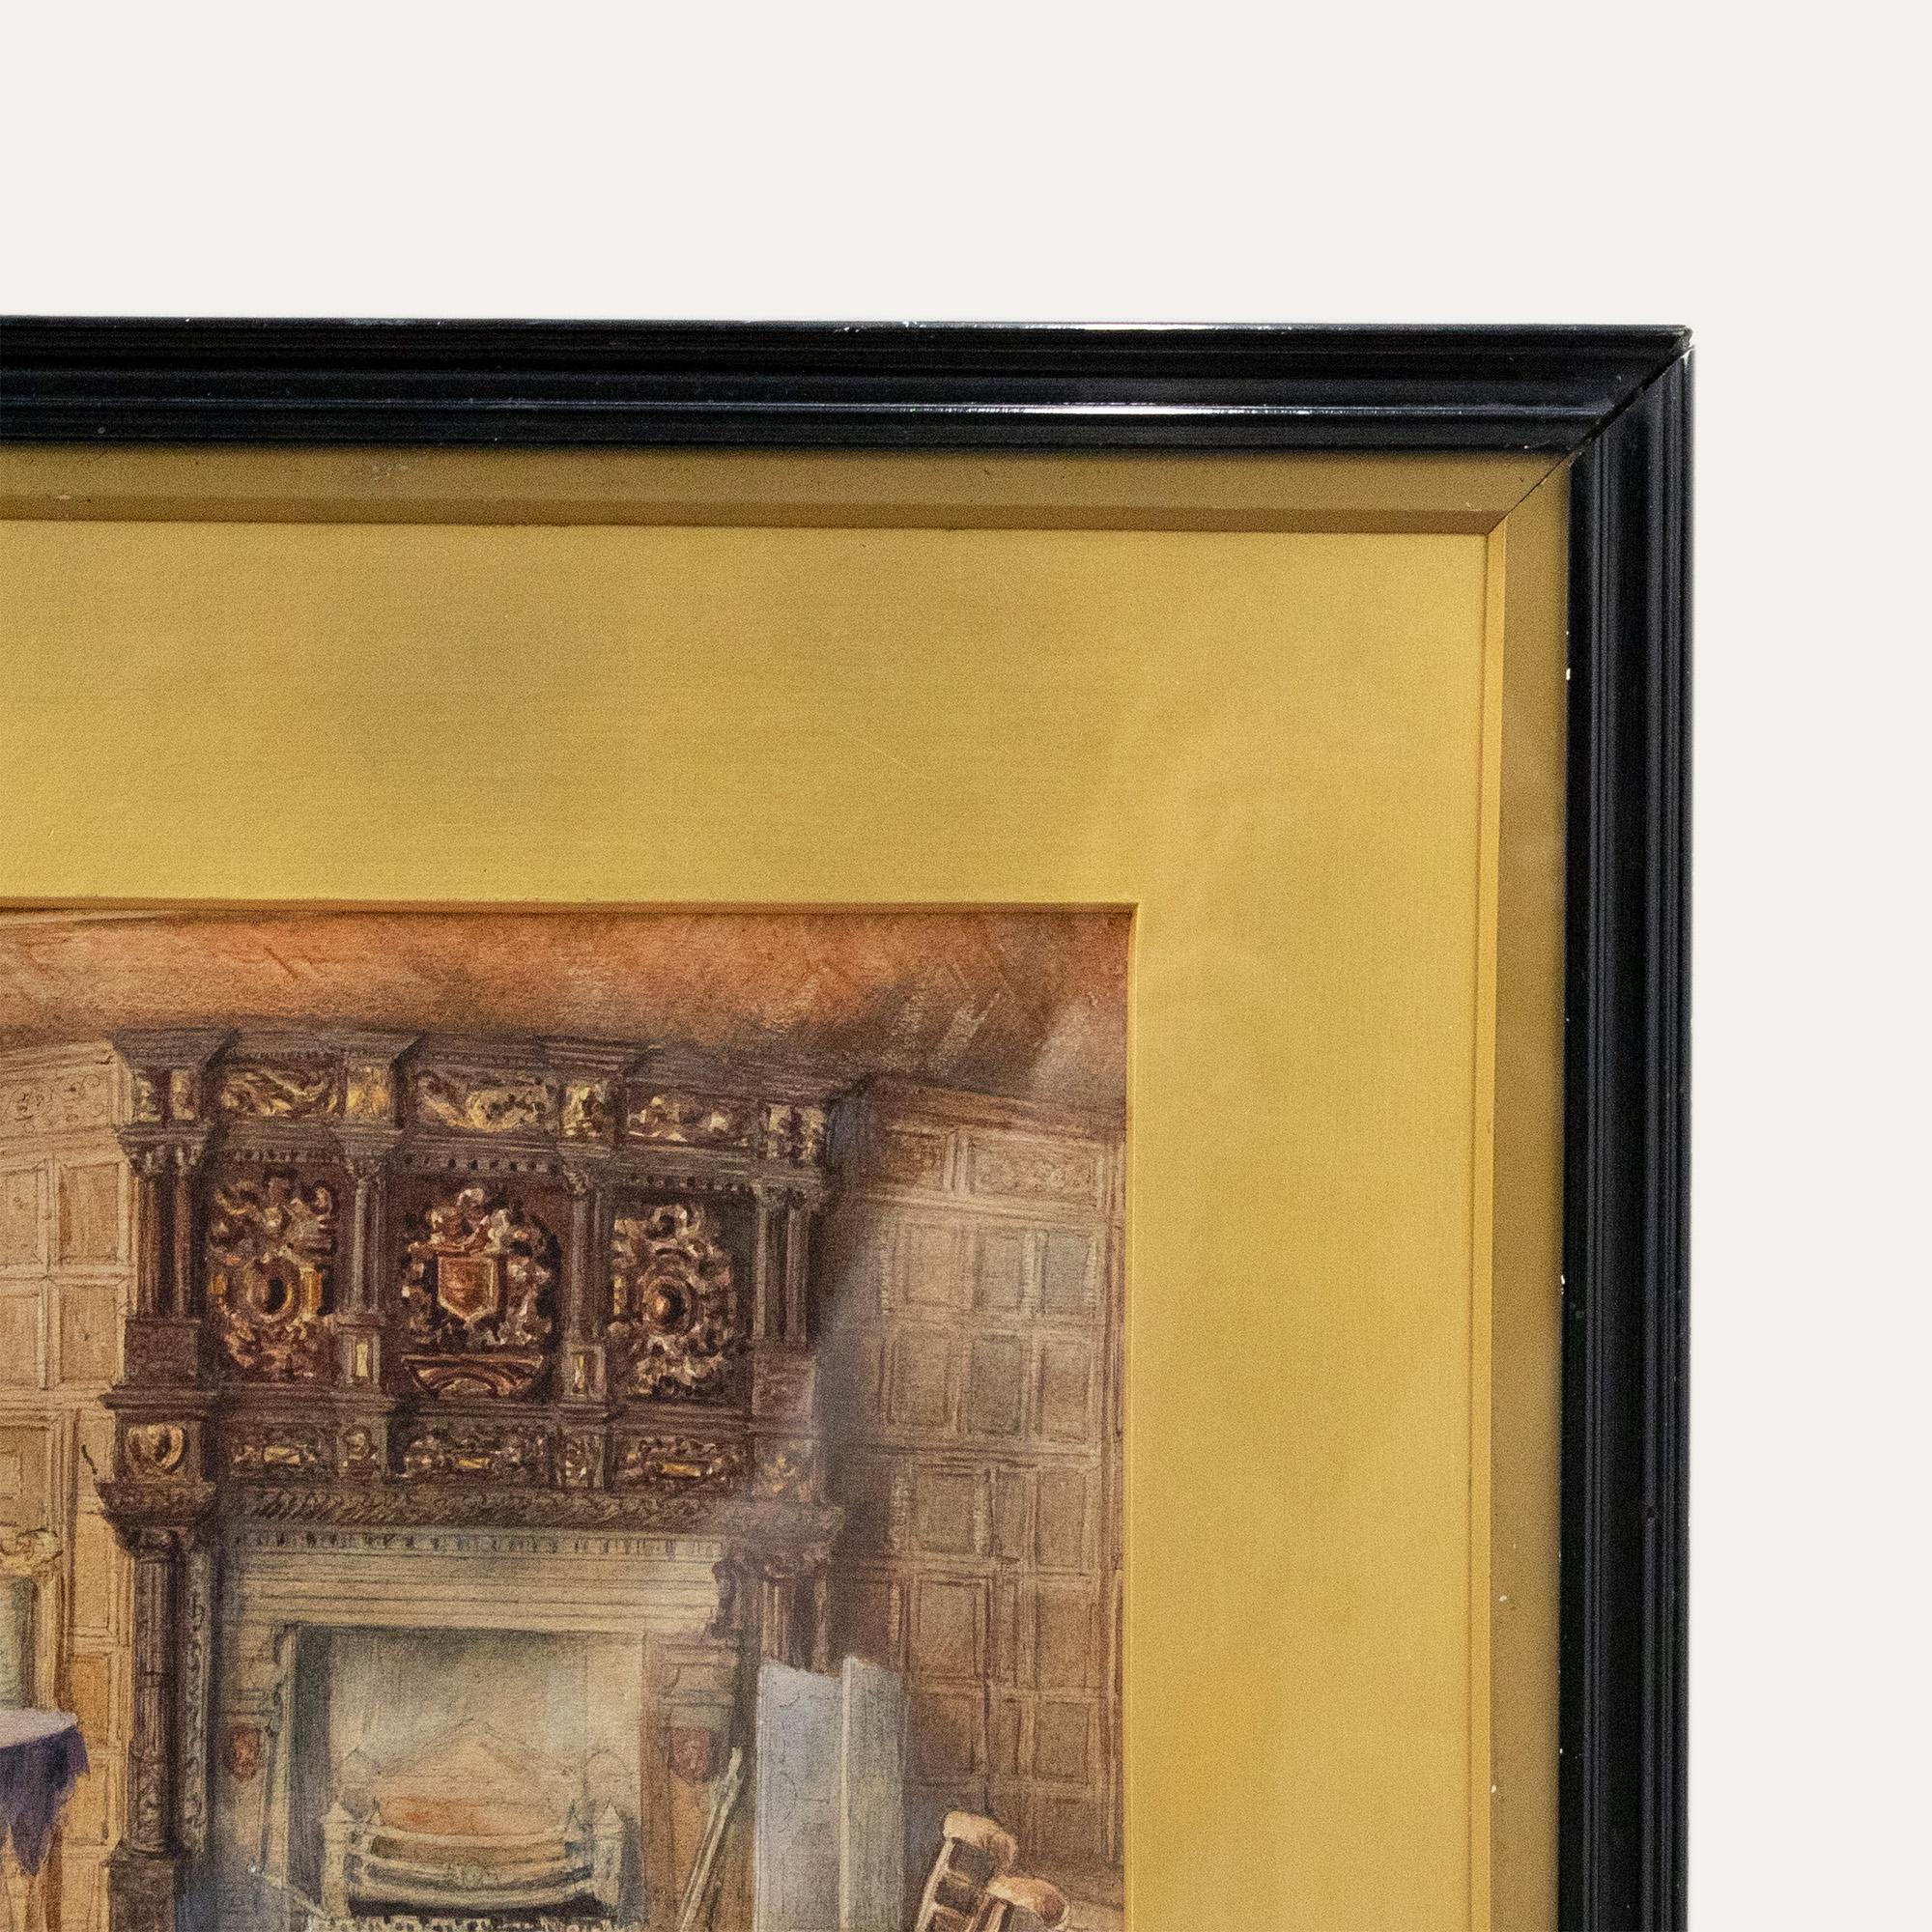 A particularly fine watercolour study of the Mayor's Parlour at Leicester Guildhall. The craftsmanship and carpentry of the interior instantly grabs your attention, testament to the artist's consideration to detail and fine brushwork. Indistinctly